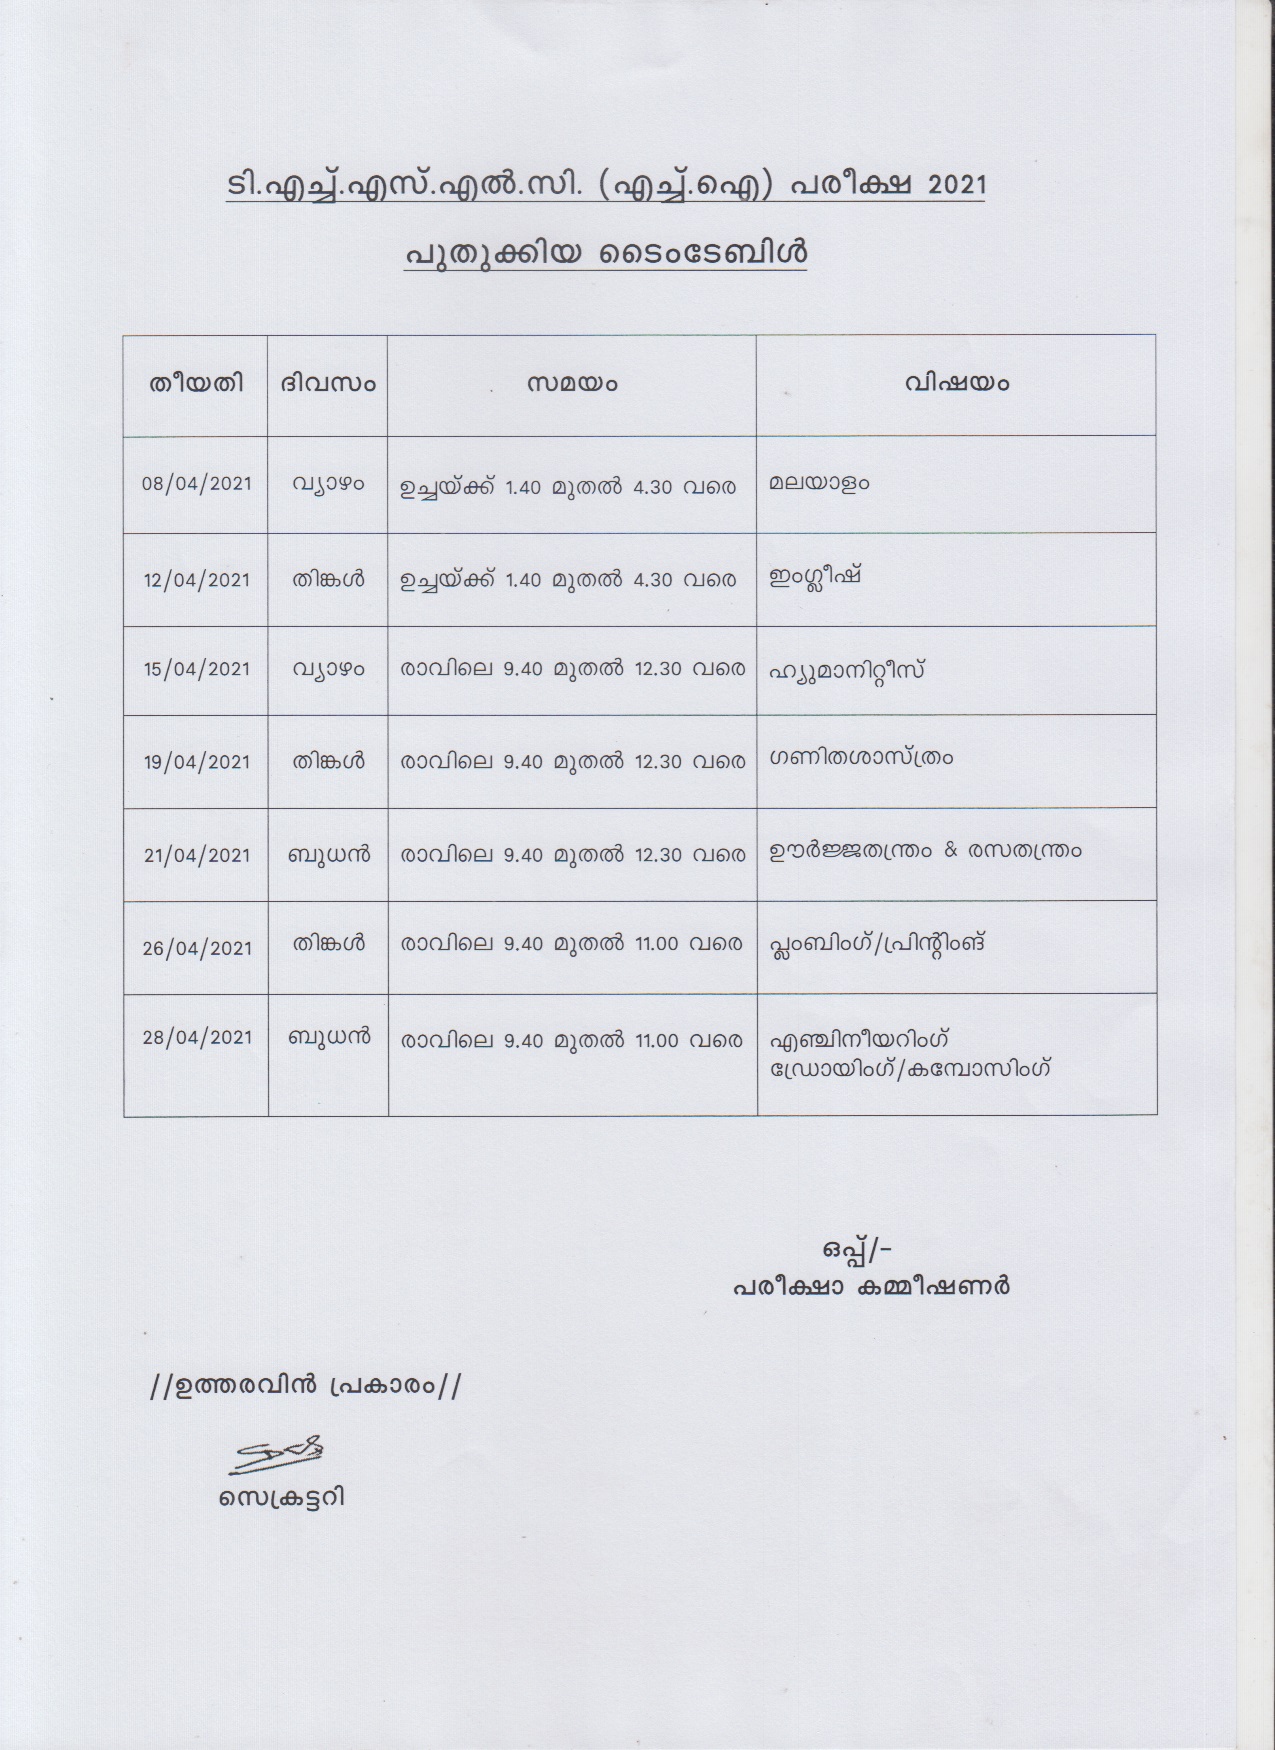 SSLC and THSLC March 2021 Revised Timetable - Notification Image 4